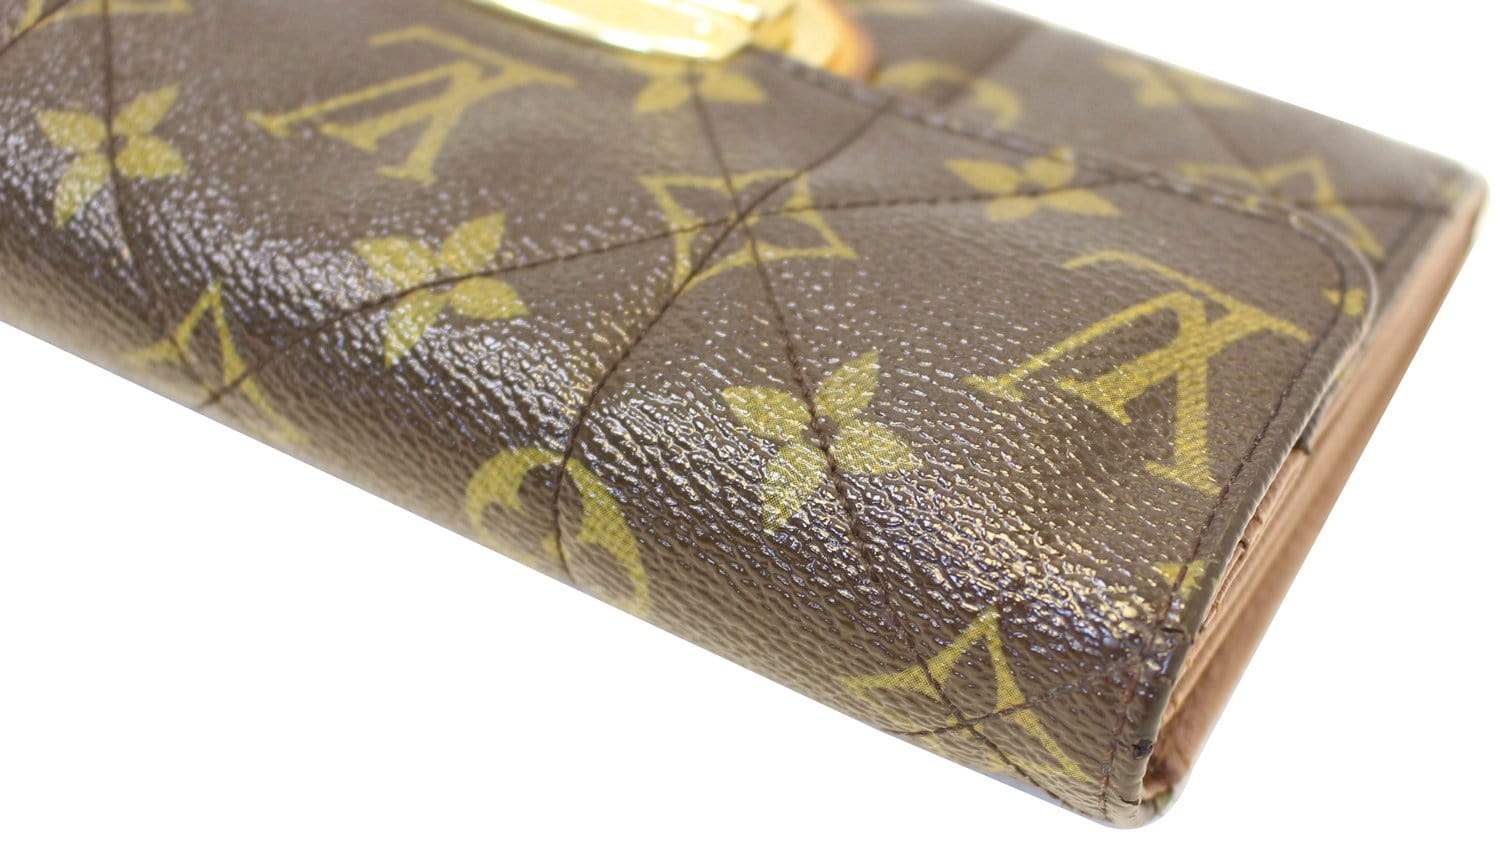 Louis Vuitton Quilted Etoile Wallet